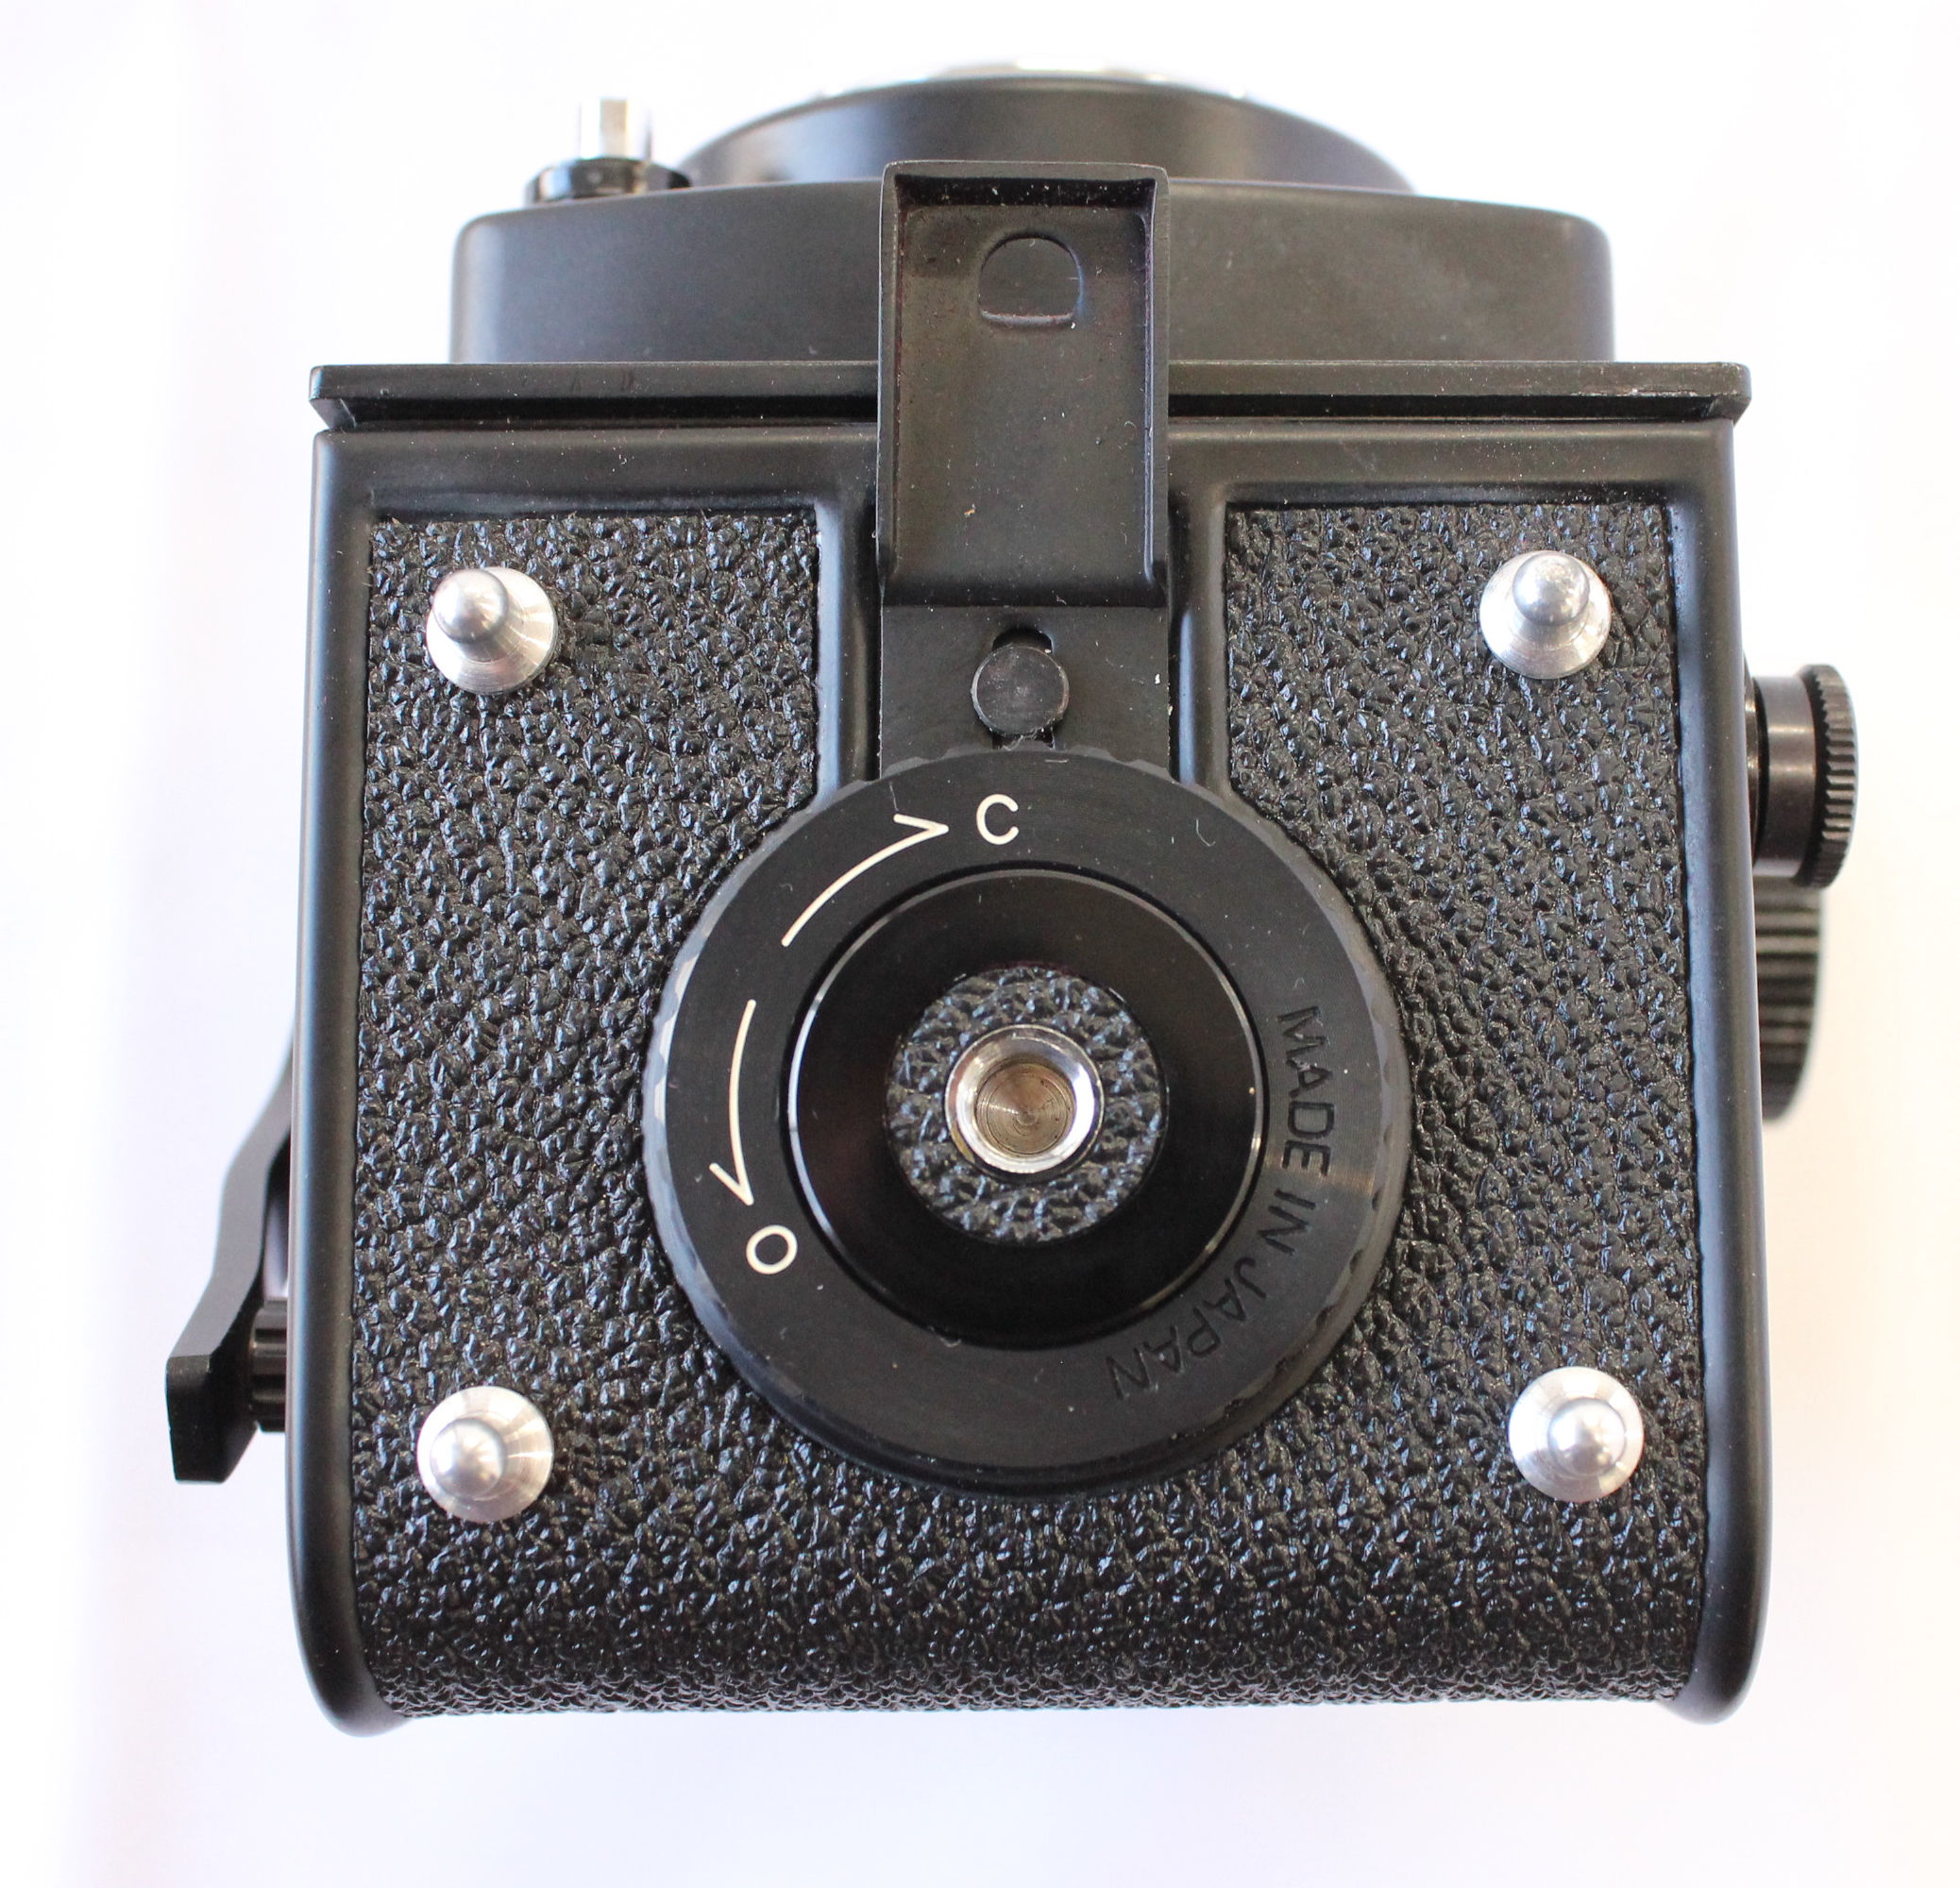  YASHICA MAT 124 G 6x6 TLR Medium Format Camera with 80mm F/3.5 Lens from Japan Photo 12